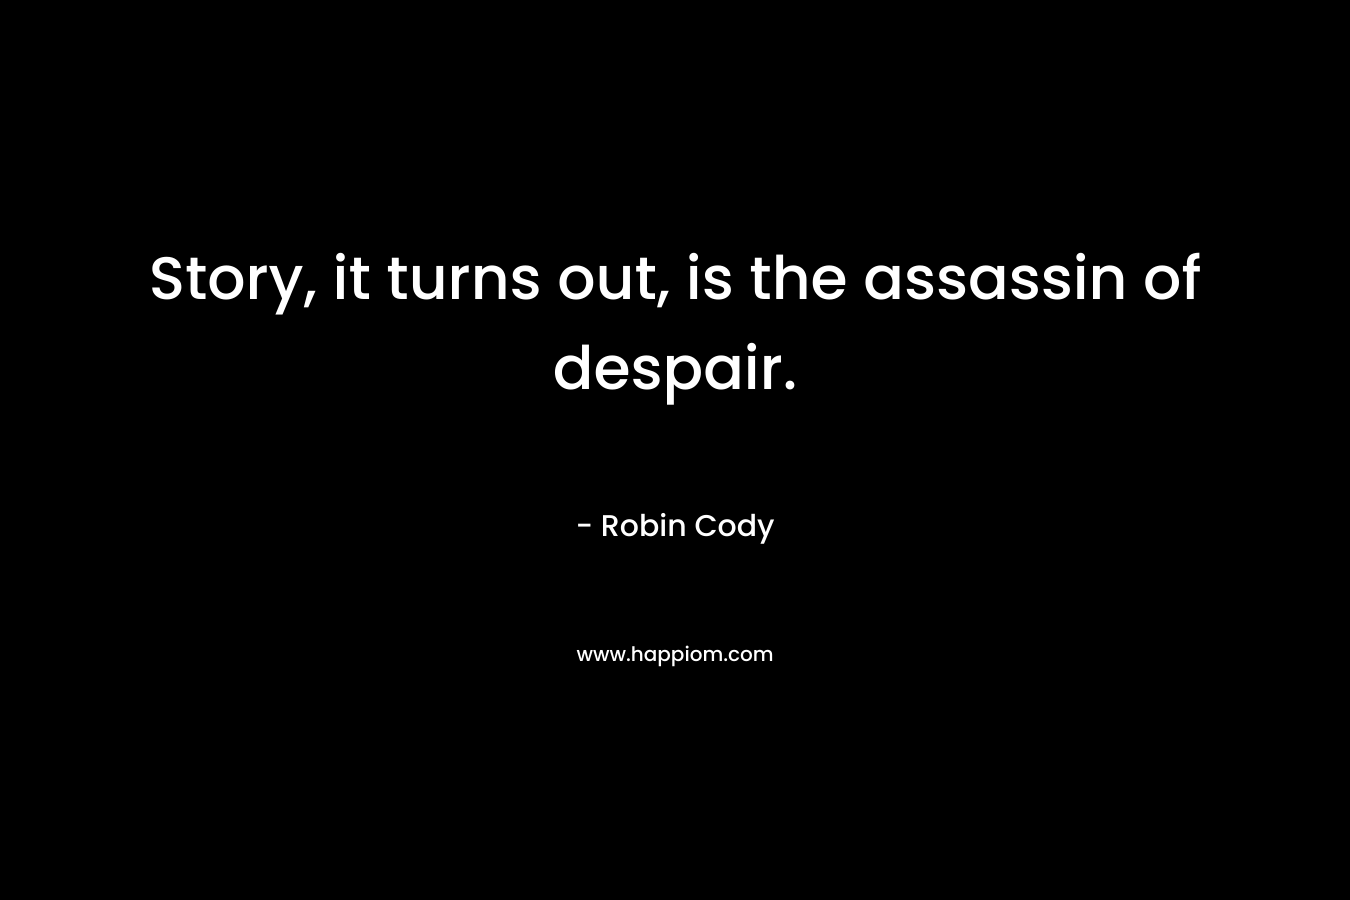 Story, it turns out, is the assassin of despair.